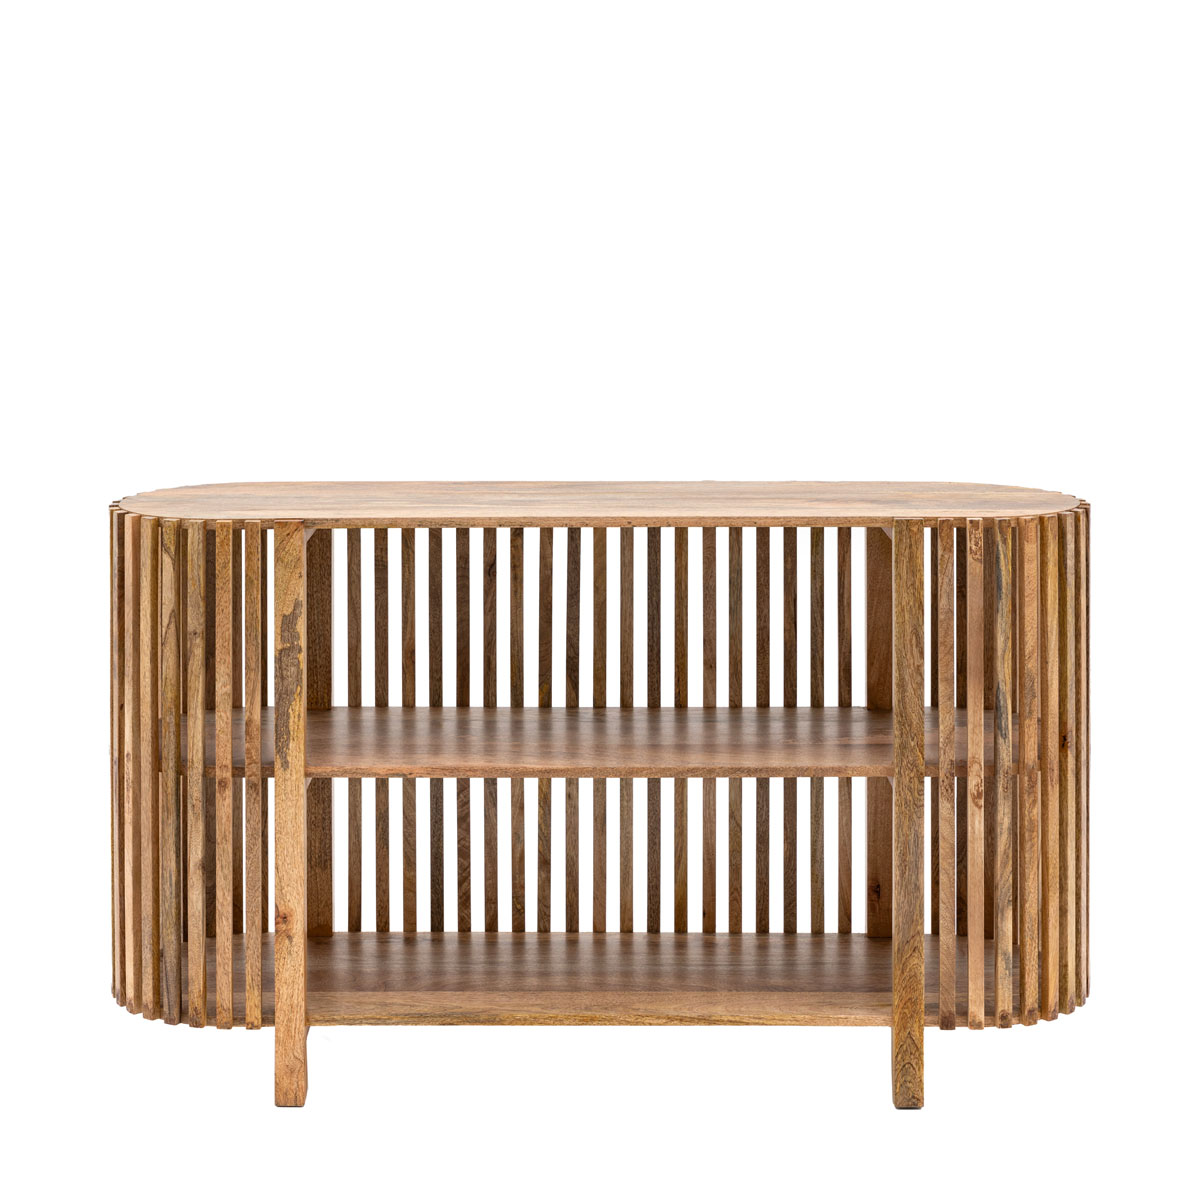 Voss Slatted Console Table 1400x400x700mm